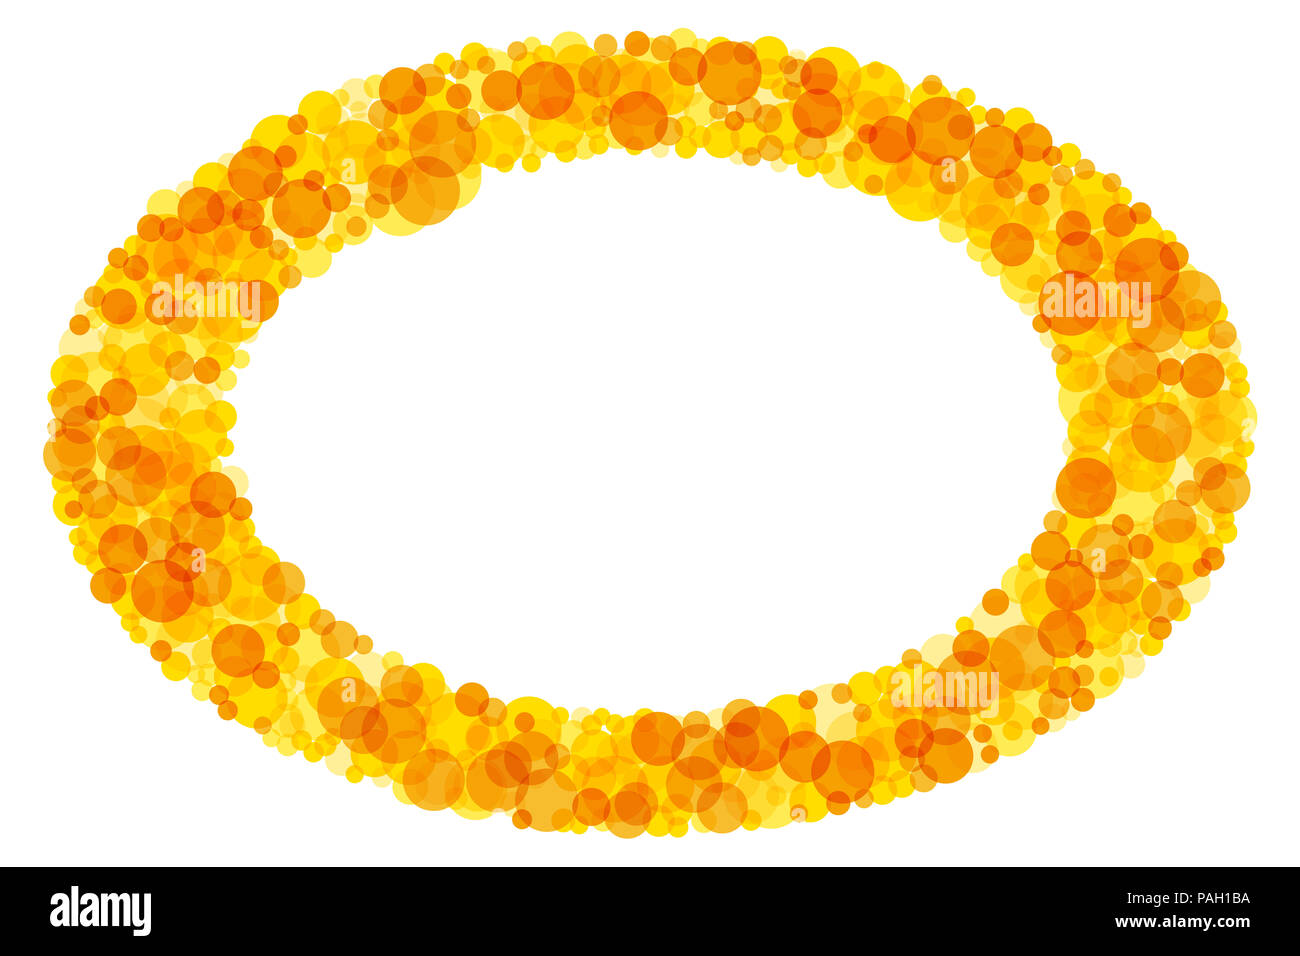 Bright colored elliptical frame. Sparkling translucent dots in the colors yellow to orange forming a ring pattern. Sunny background and decor. Stock Photo